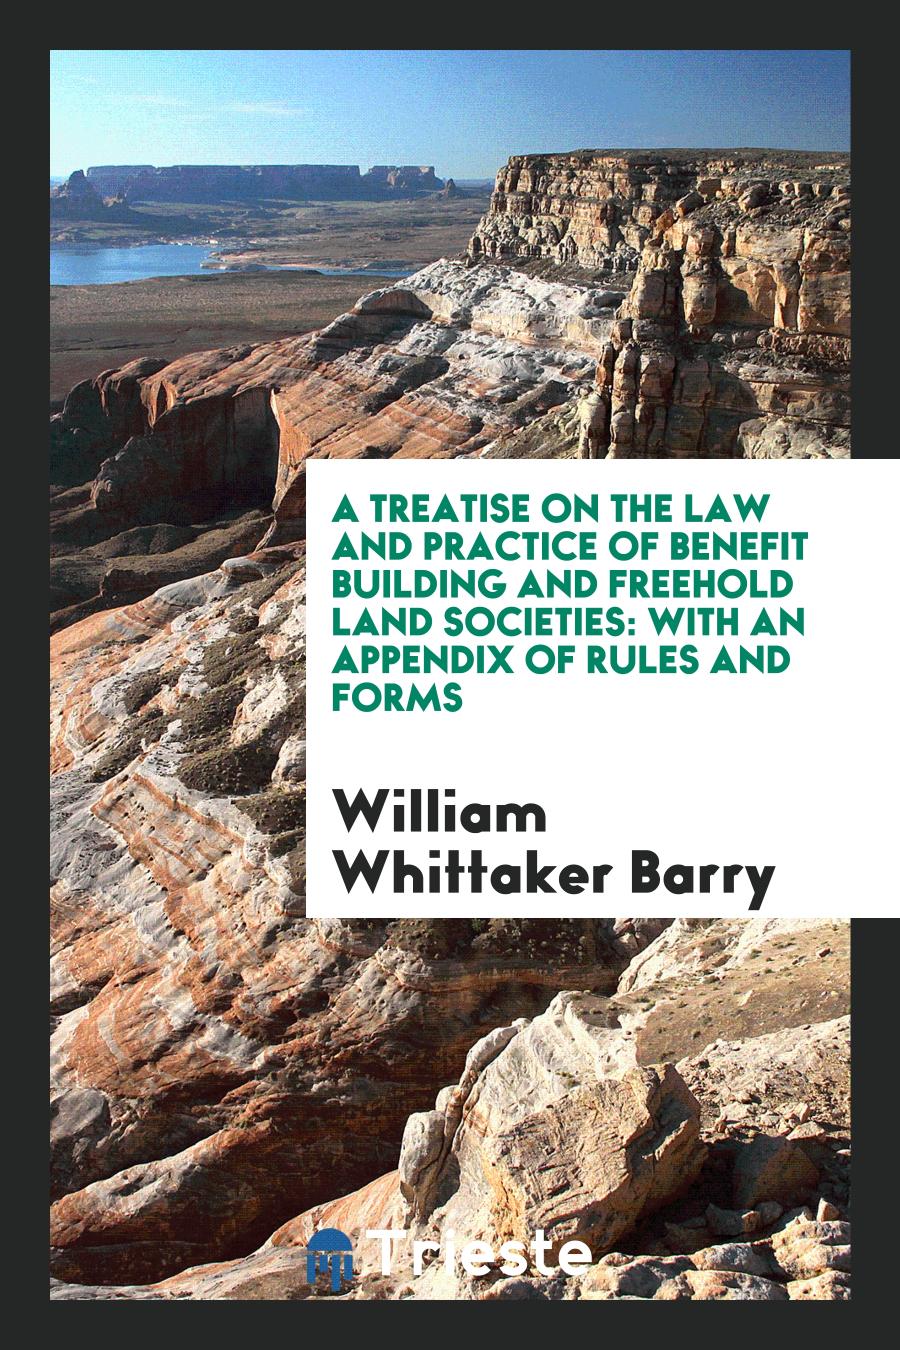 A Treatise on the Law and Practice of Benefit Building and Freehold Land Societies: With an Appendix of Rules and Forms